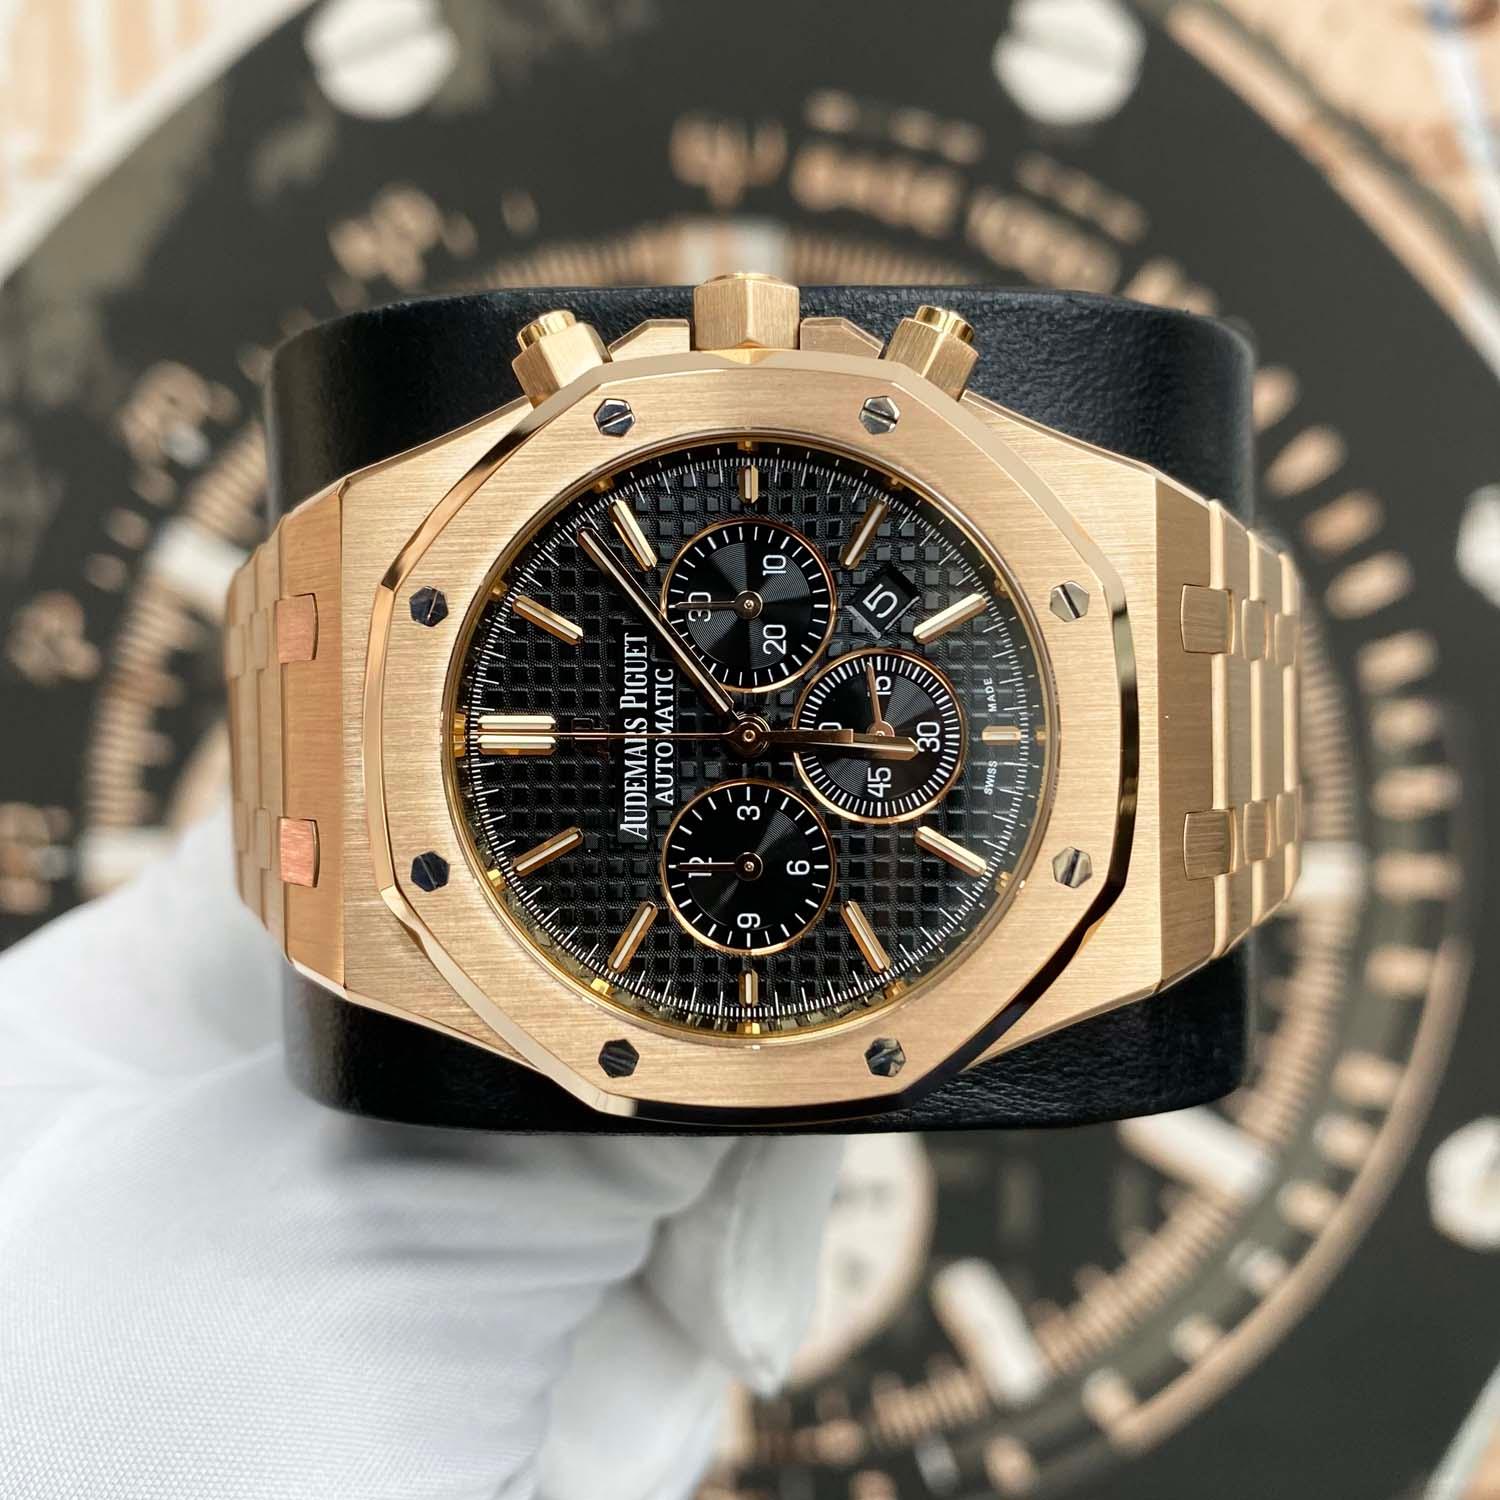 Audemars Piguet Royal Oak Chronograph 41mm 26320OR.OO.1220OR.01 Black Dial Pre-Owned - Gotham Trading 